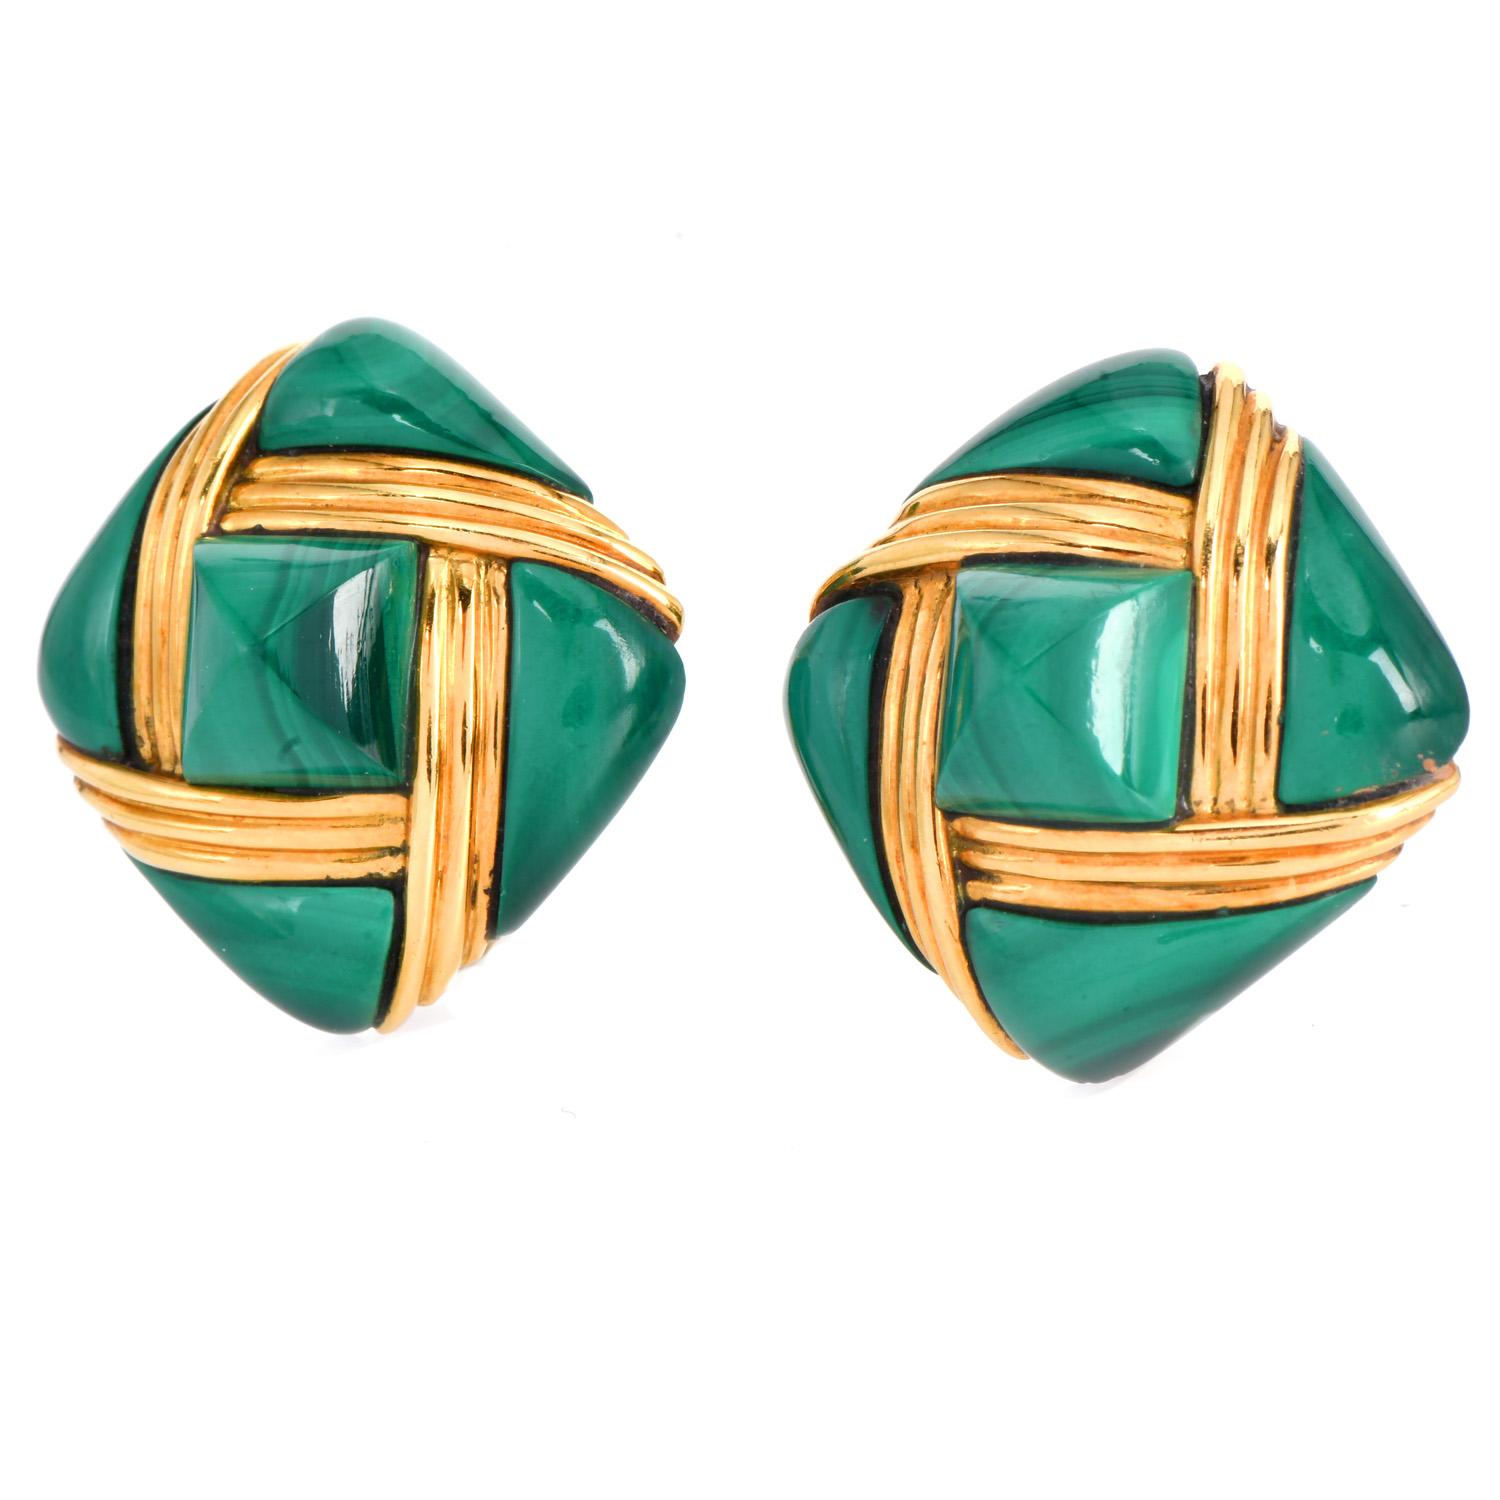 Splendid Malachite cushion-shaped earrings, meticulously crafted from 18K yellow gold.

These vintage earrings feature a mesmerizing interplay of natural, textured green malachite, thoughtfully layered in an exquisite pattern, delicately nestled